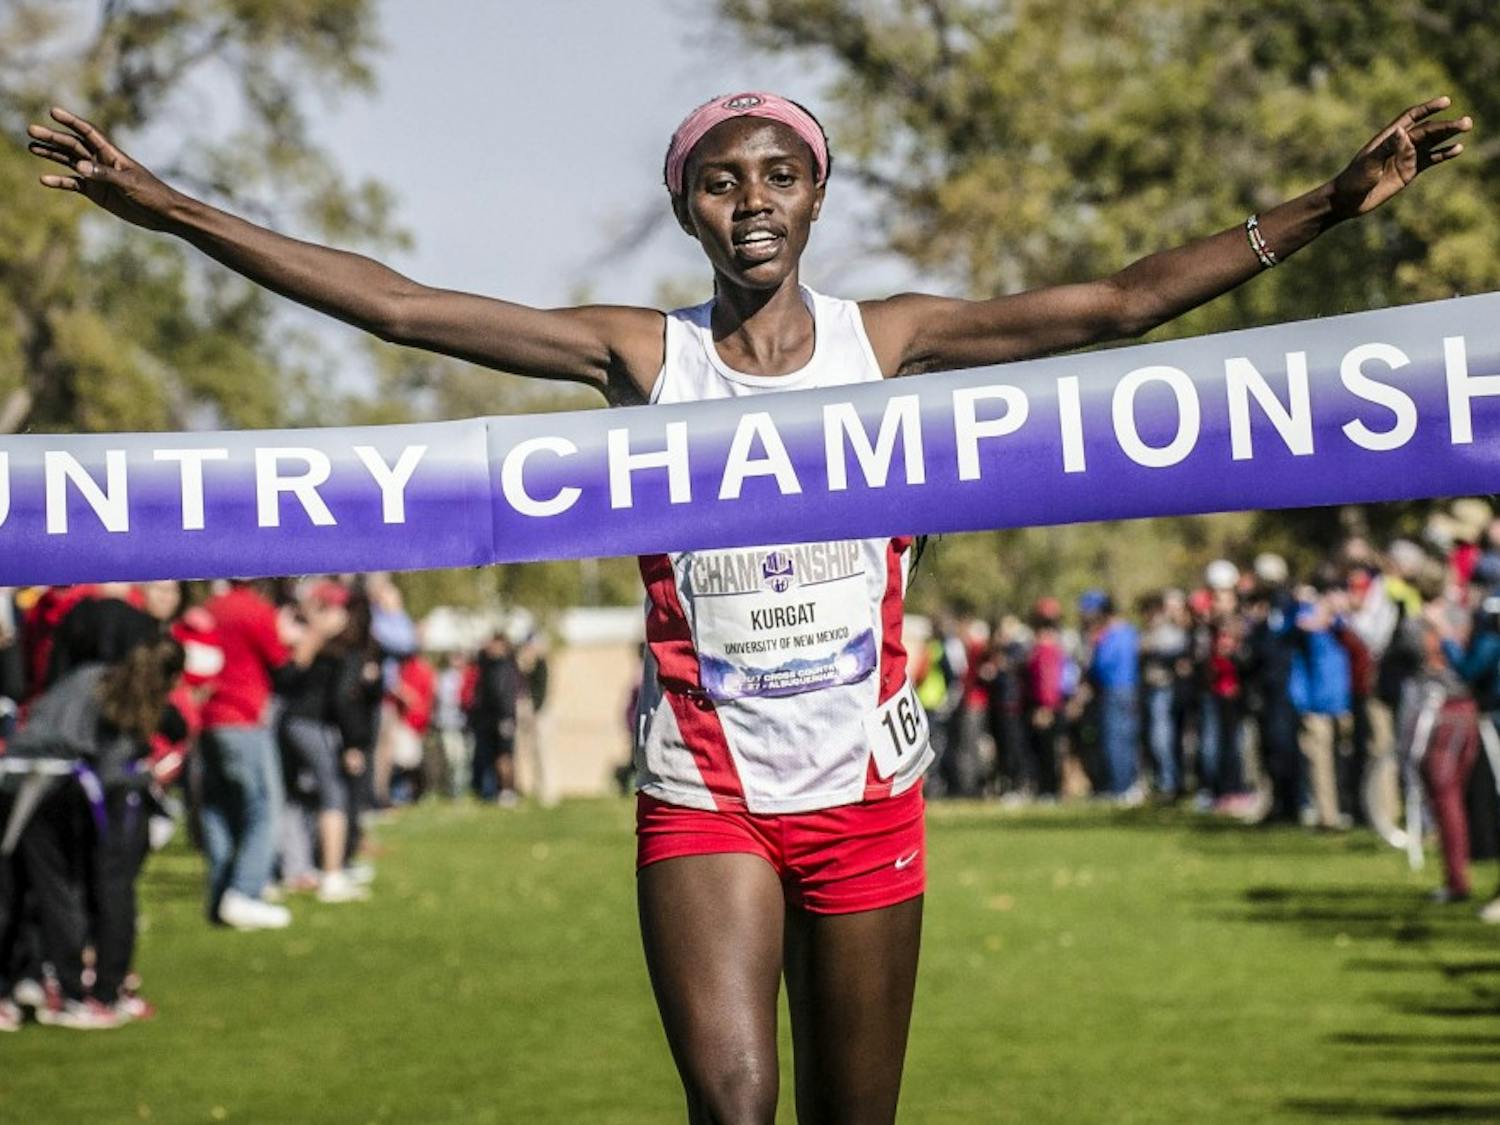 Ednah Kurgat finishes first place during the Mountain West Cross Country Championship hosted at UNM's North Golf Course on Oct. 27, 2017. Kurgat trail-blazed the six kilometer course, with a winning time of 19 minutes and 58 seconds.